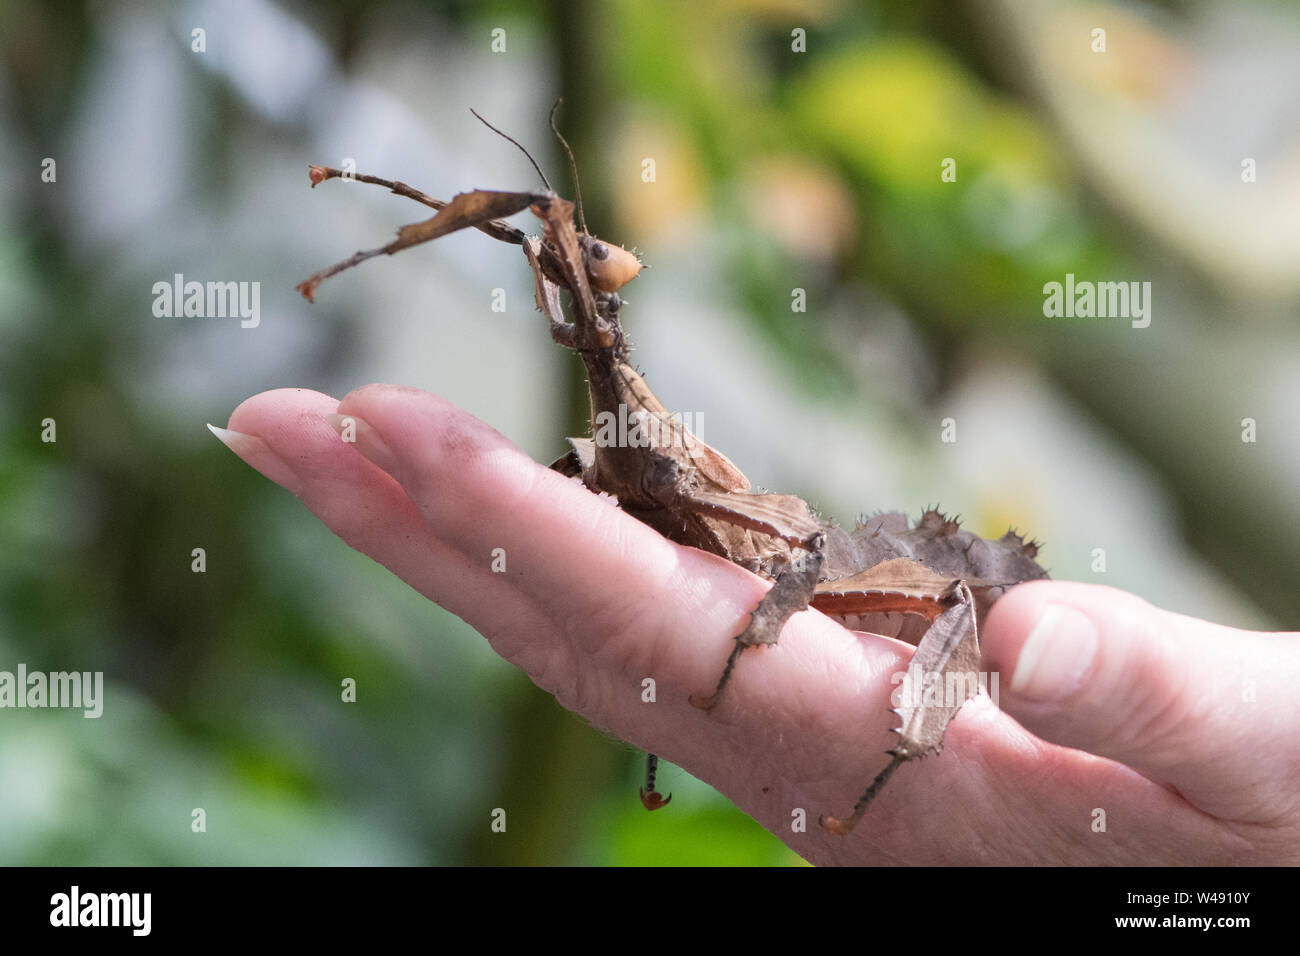 close up of stick insect on persons hand Stock Photo